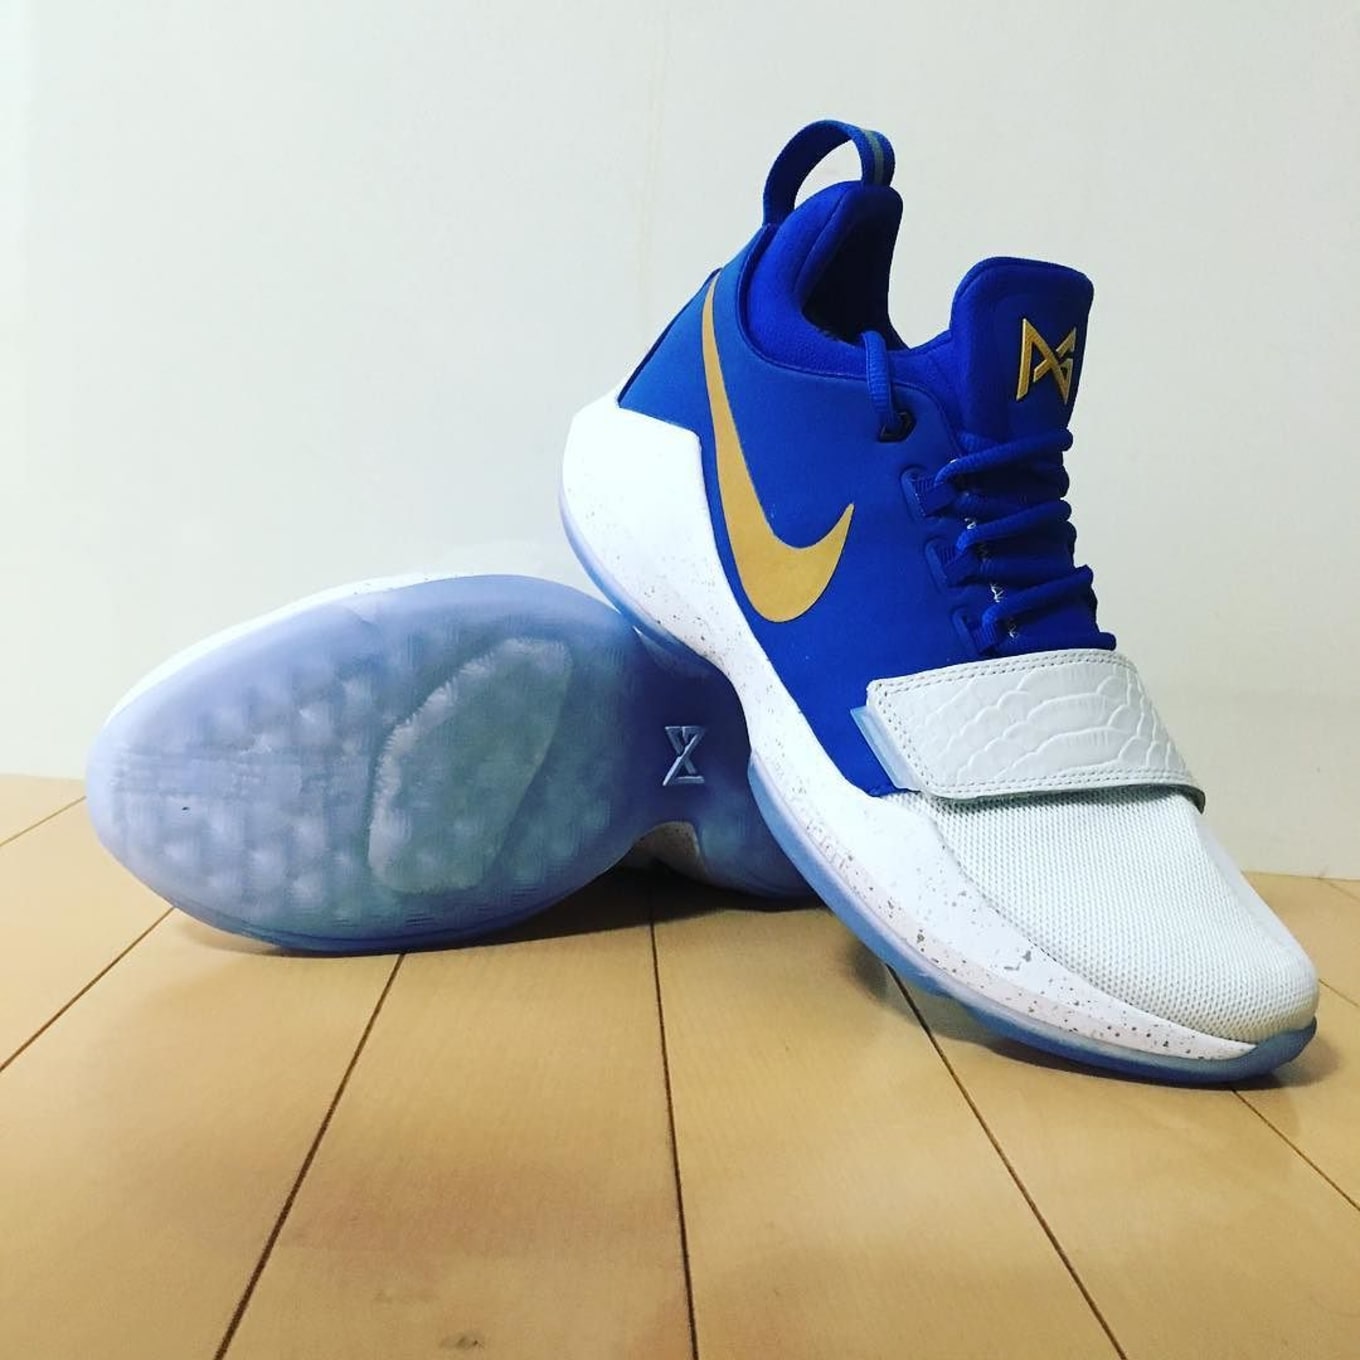 pg 1 white and gold